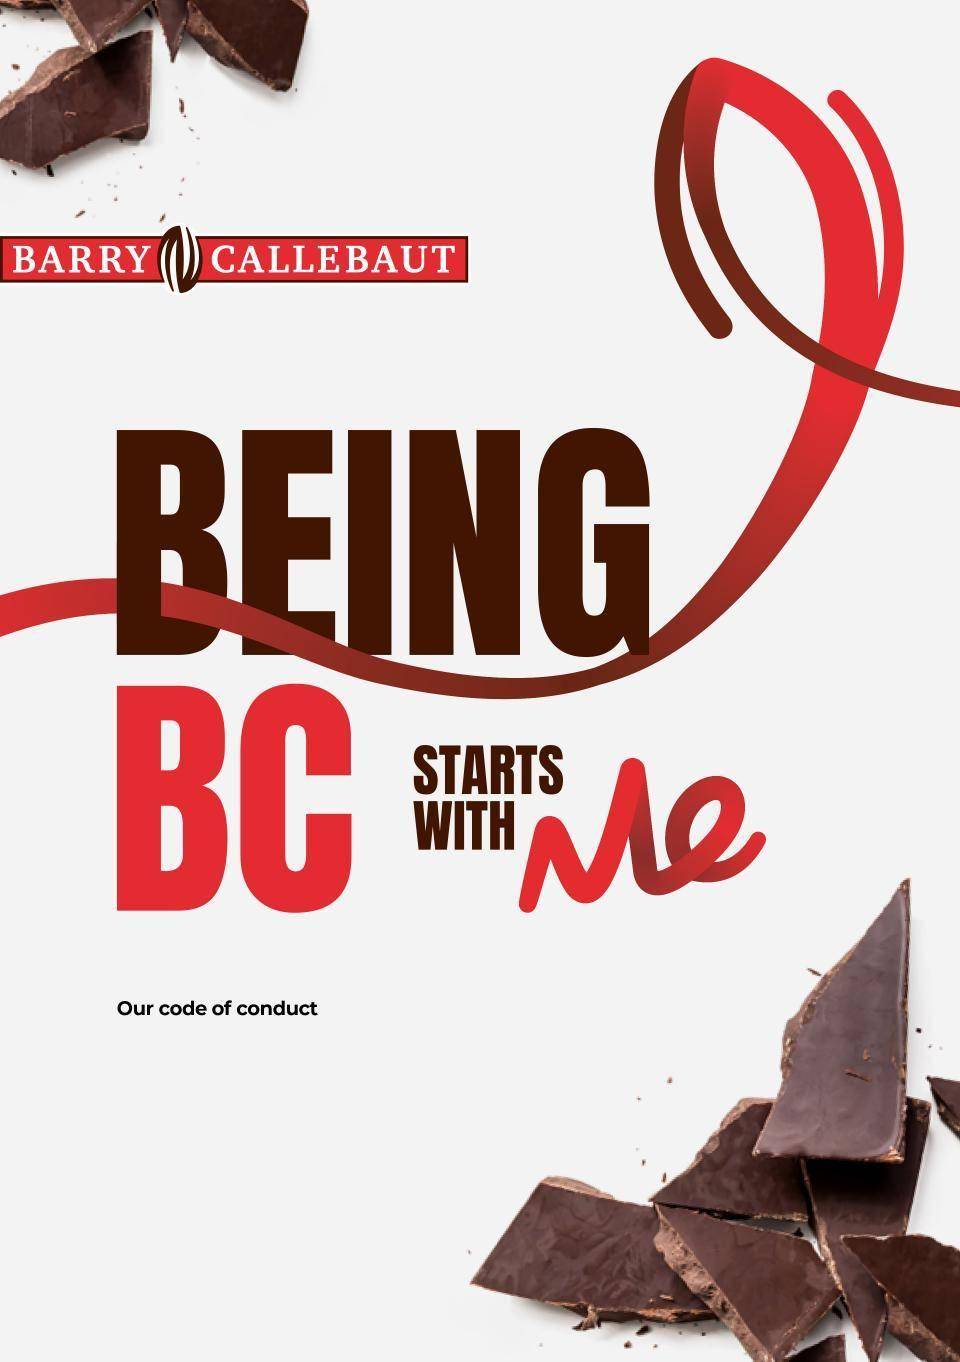 Barry Callebaut Group - Code of Conduct